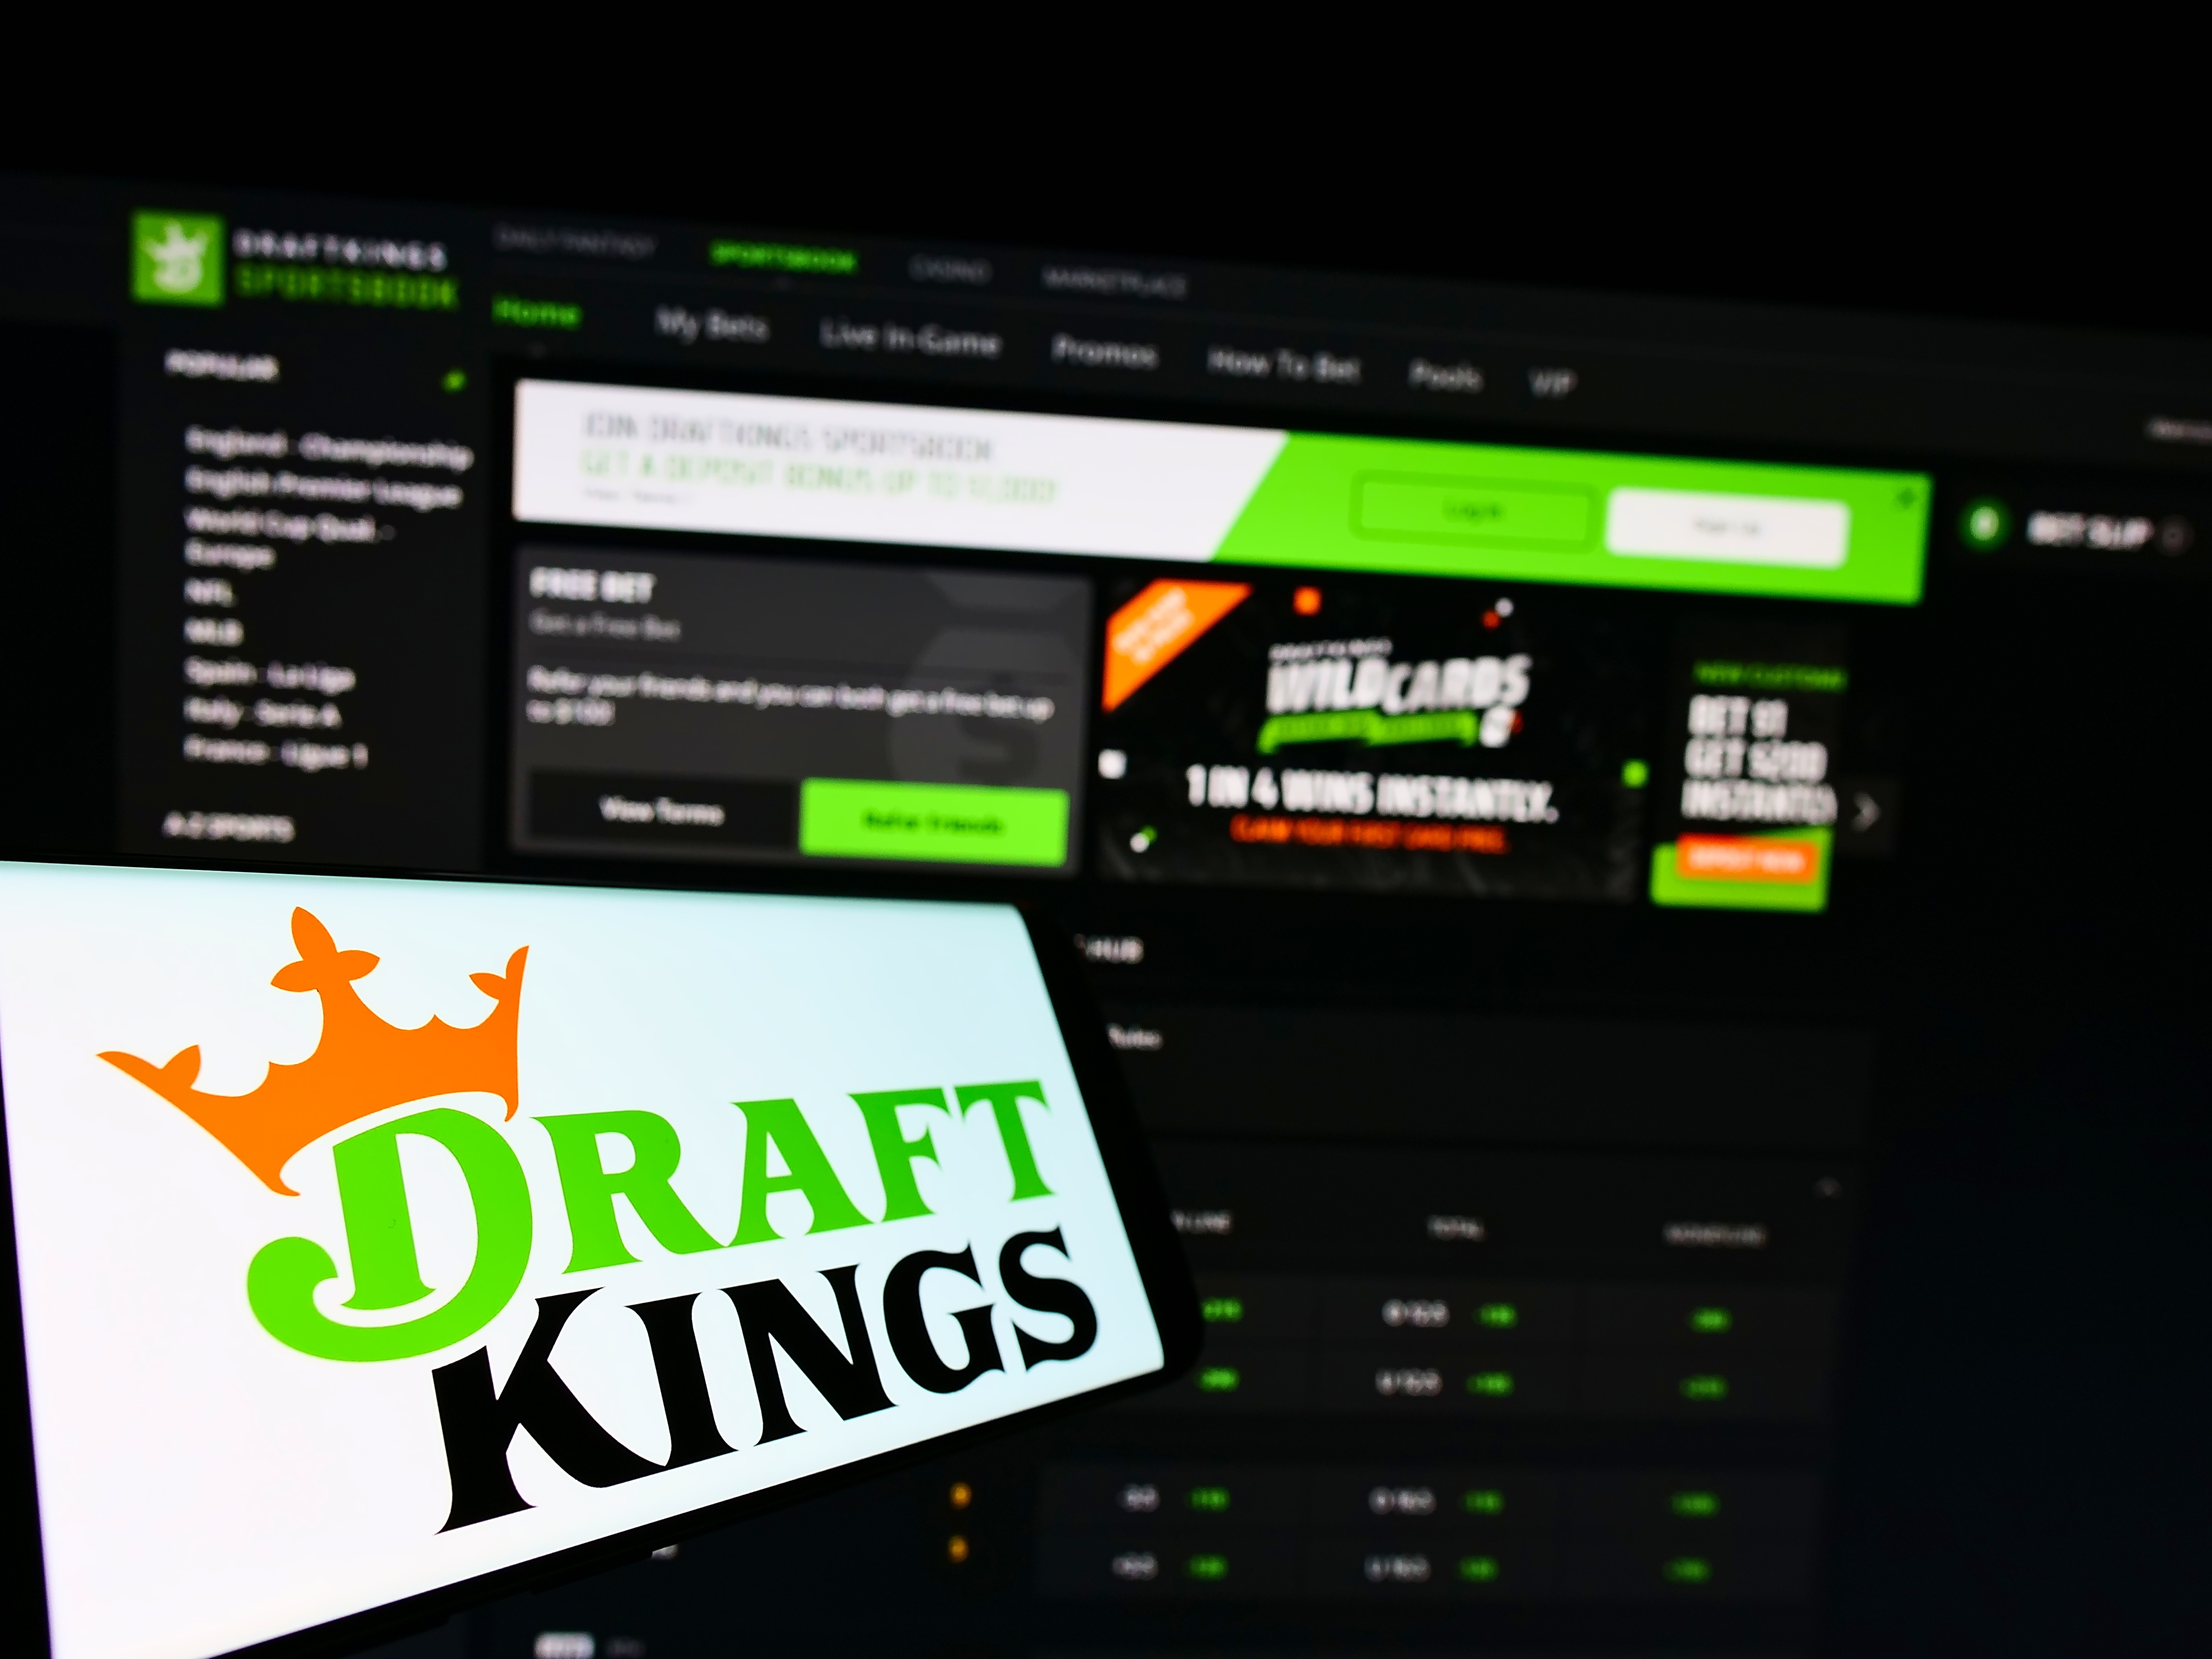 DraftKings Q2 Earnings Highlights: Revenue Beat, Company Raises Guidance, Optimistic On More State Sports Betting Launches